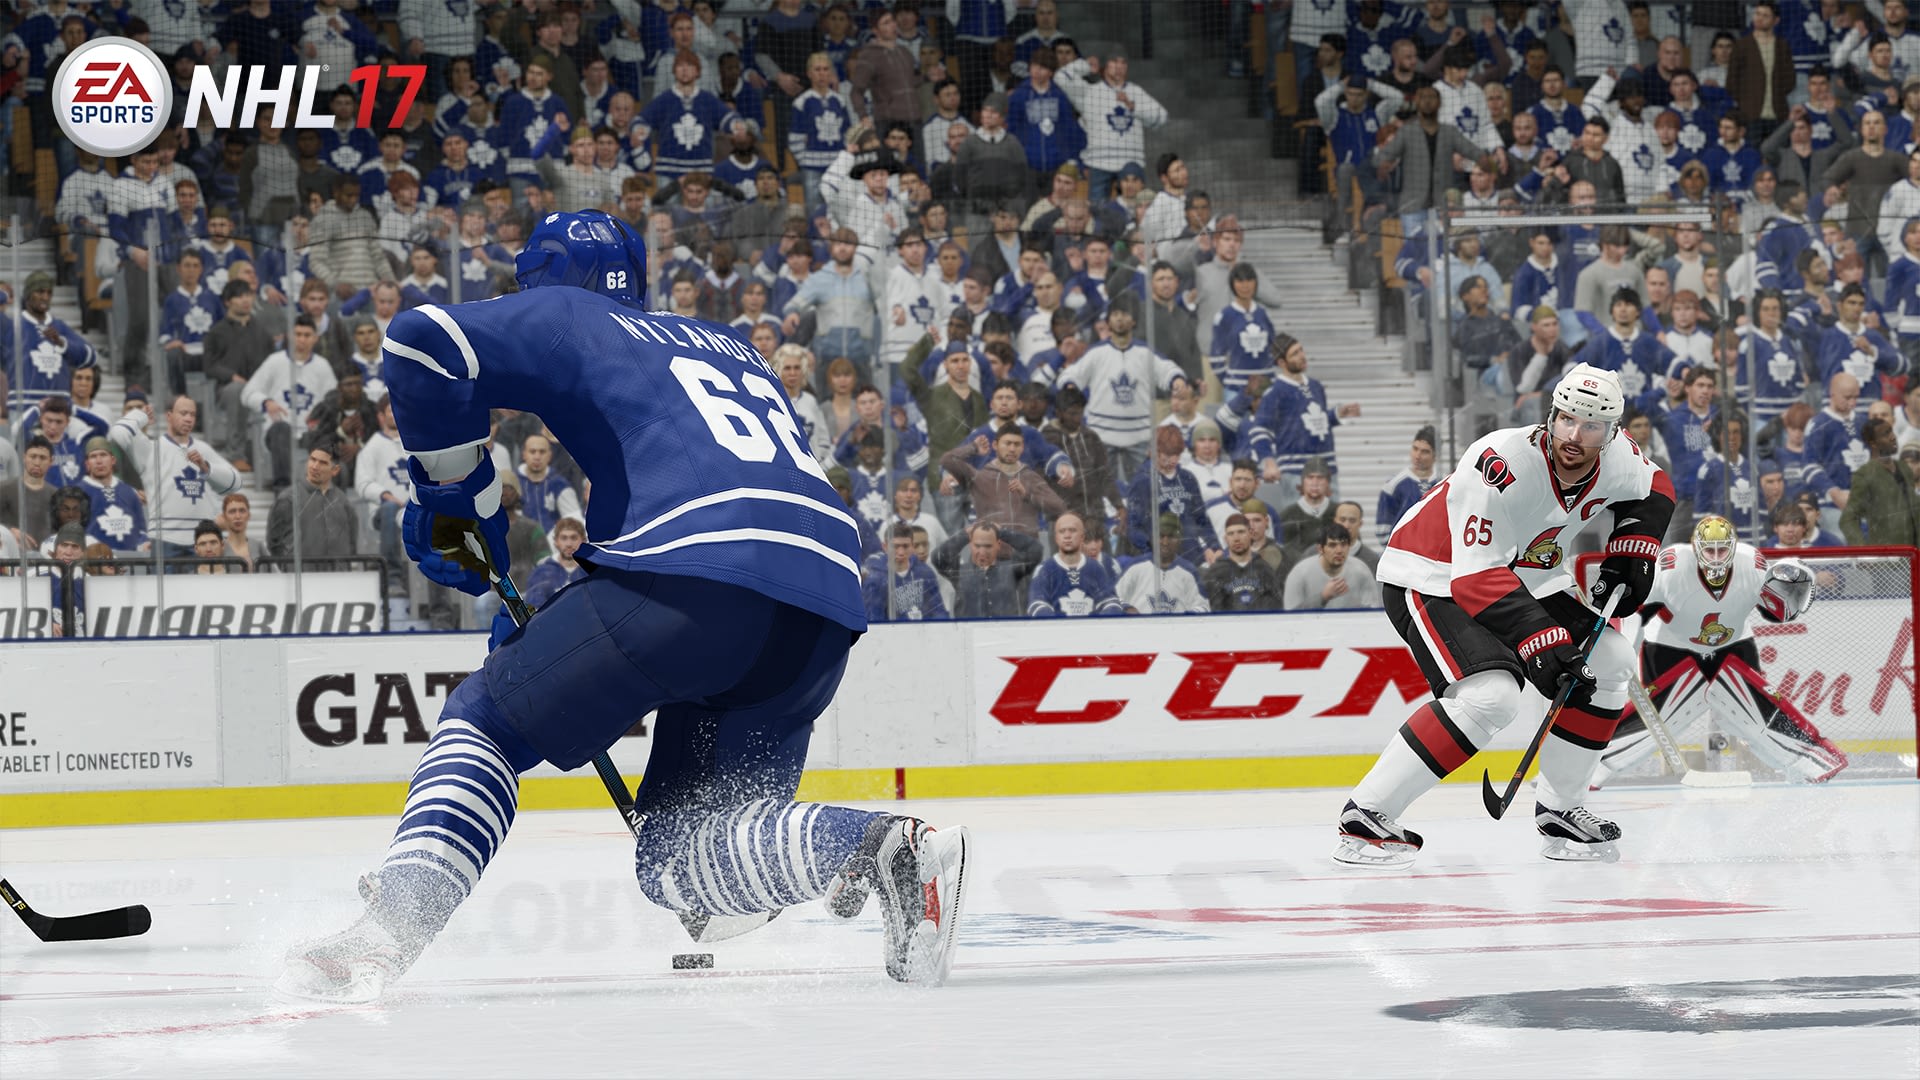 Review: NHL 17 delivers exhilarating gameplay and adds depth to old modes